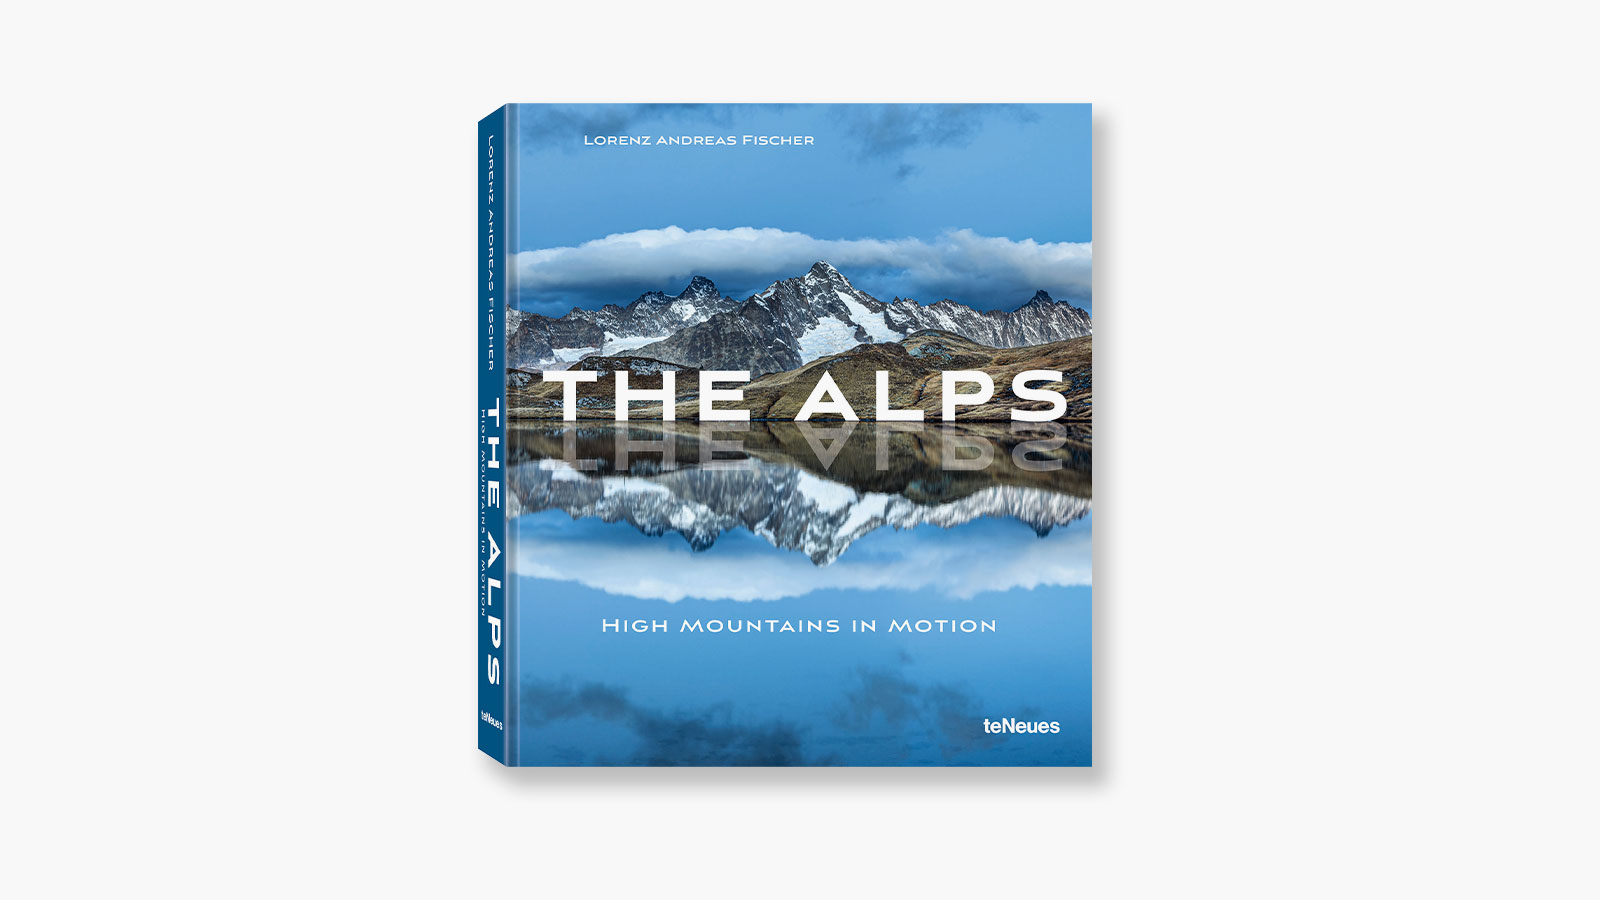 'The Alps: High Mountains in Motion' by Lorenz Andreas Fischer